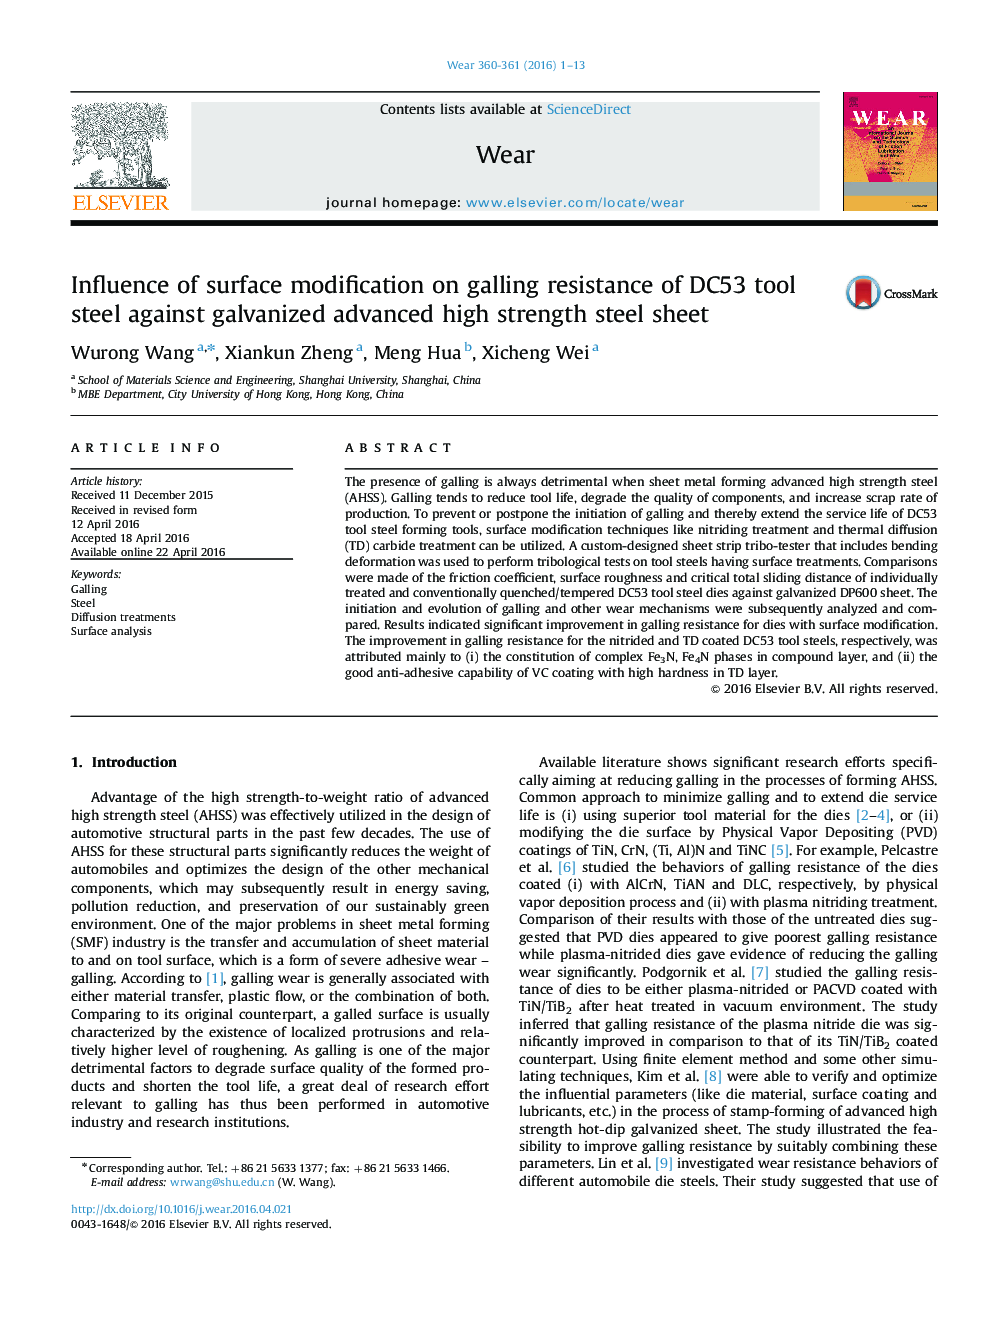 Influence of surface modification on galling resistance of DC53 tool steel against galvanized advanced high strength steel sheet